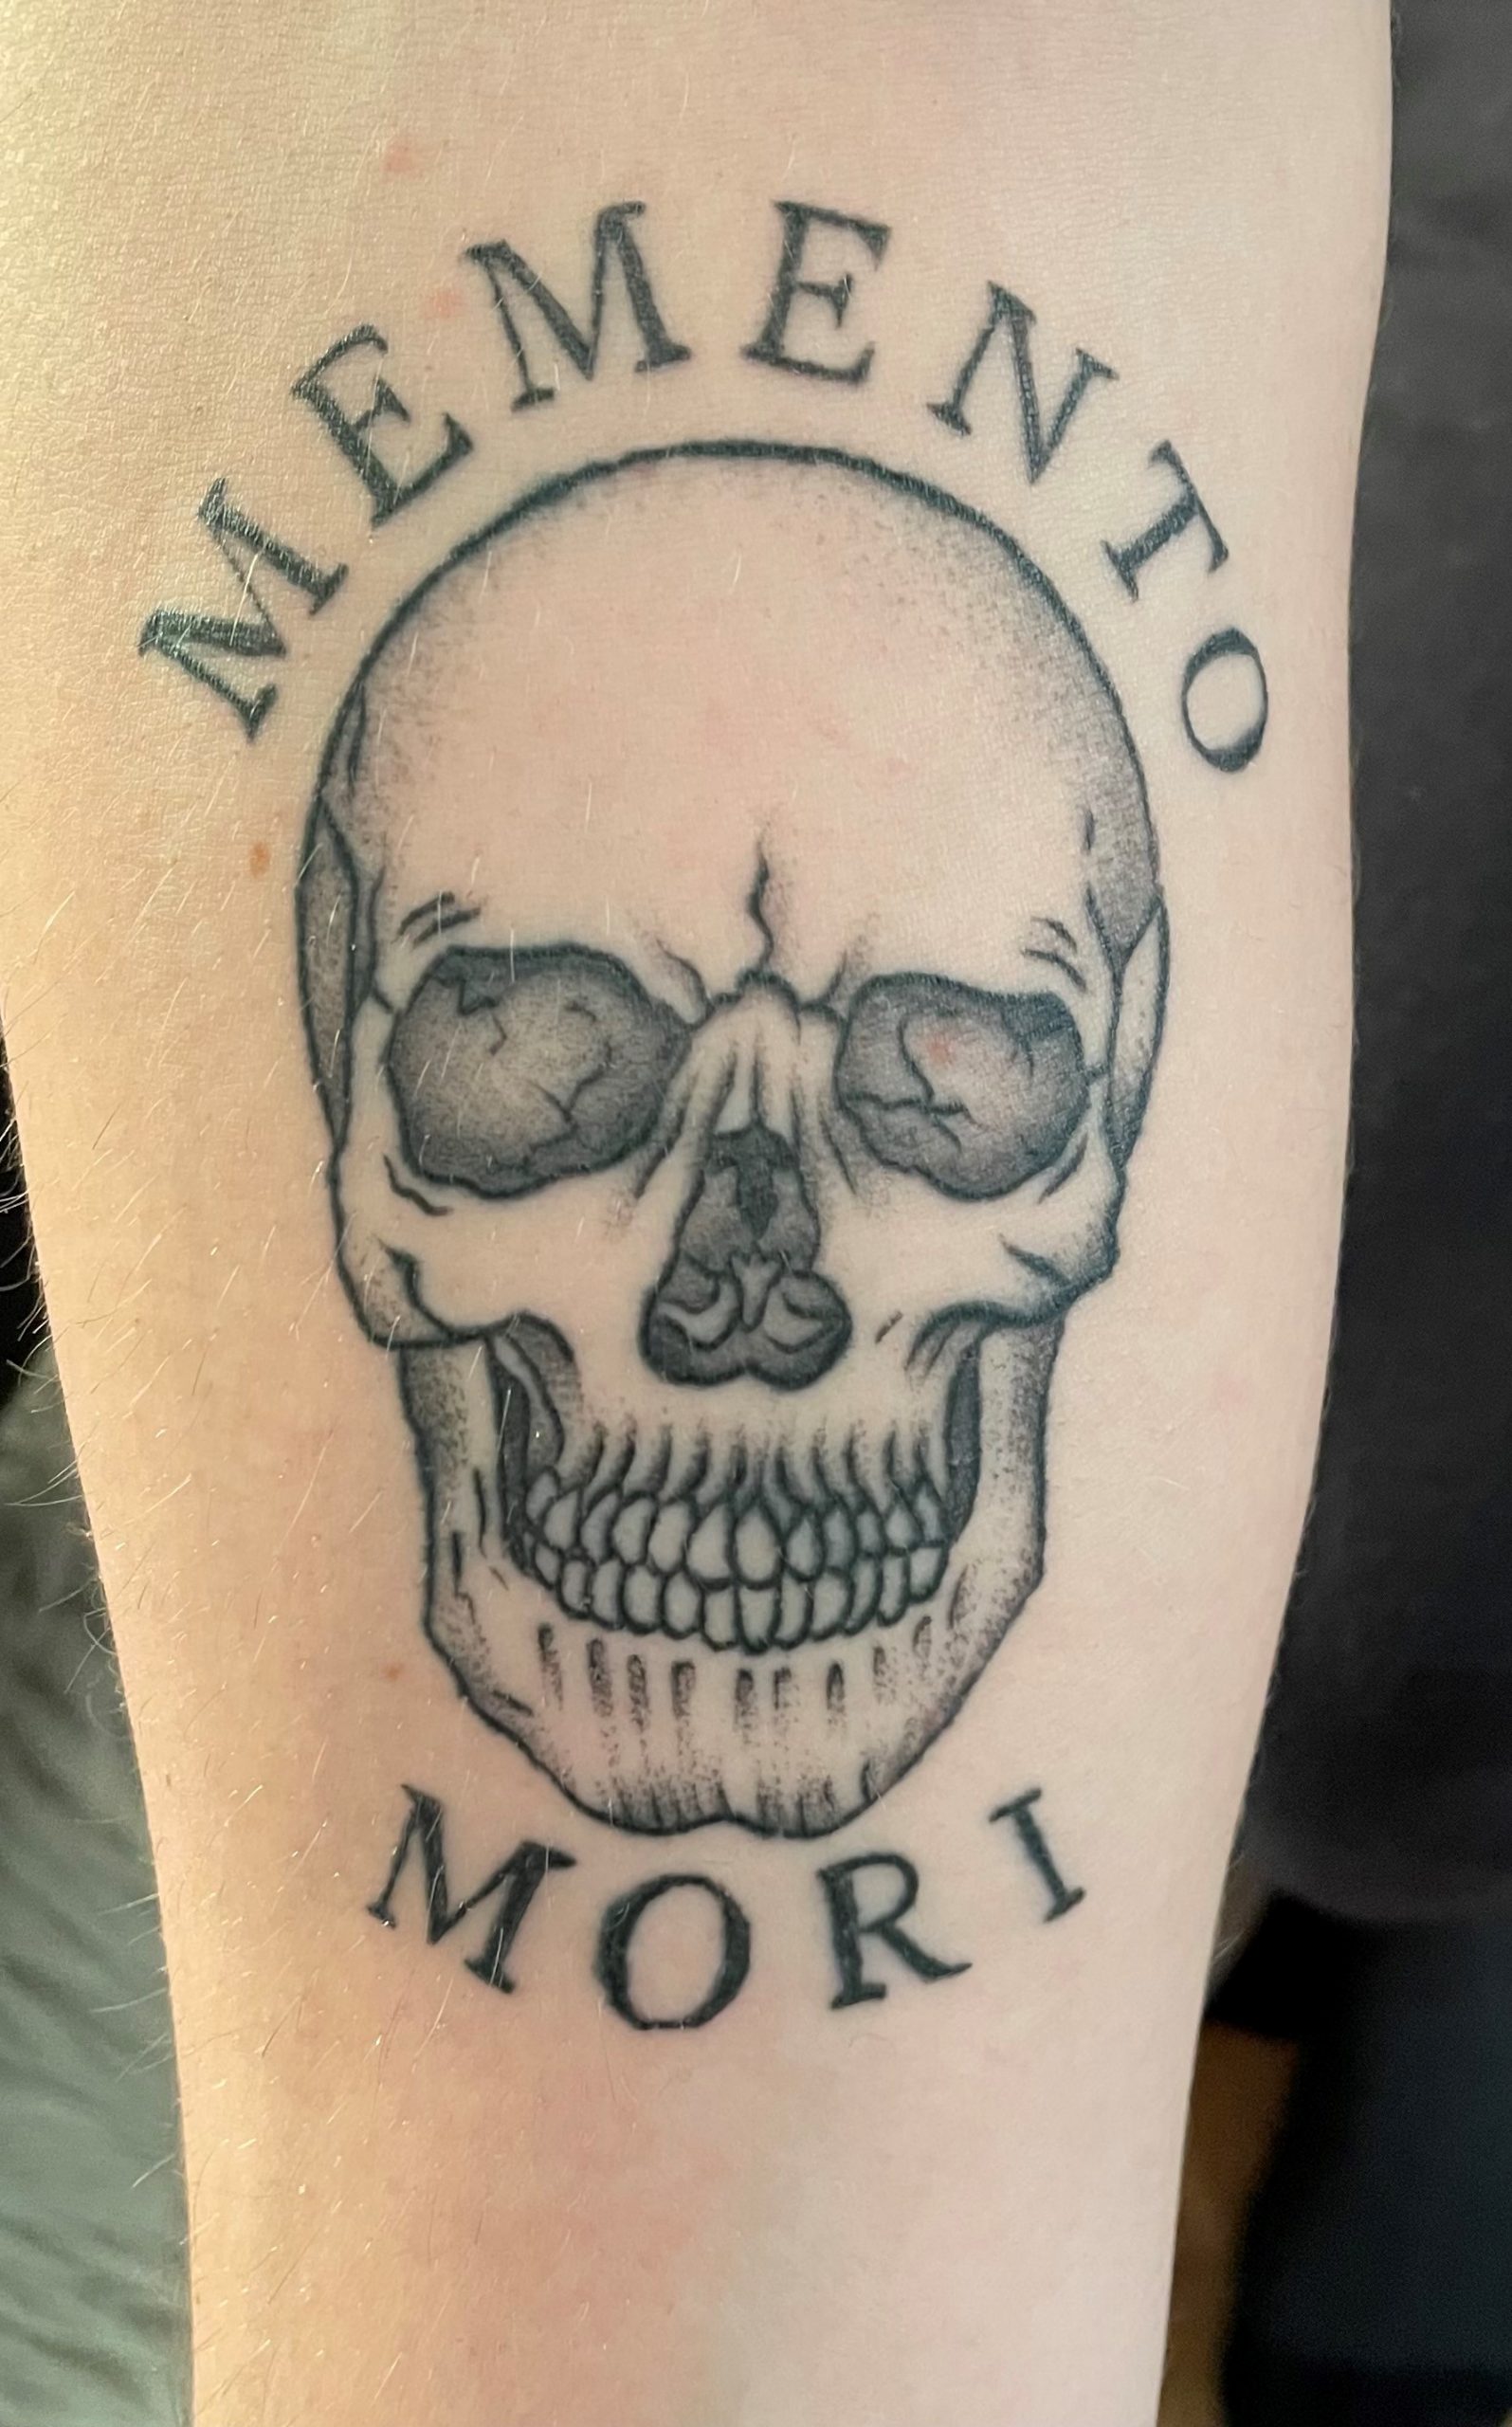 photo of a tattoo depicting a skull and a caption "memento mori"